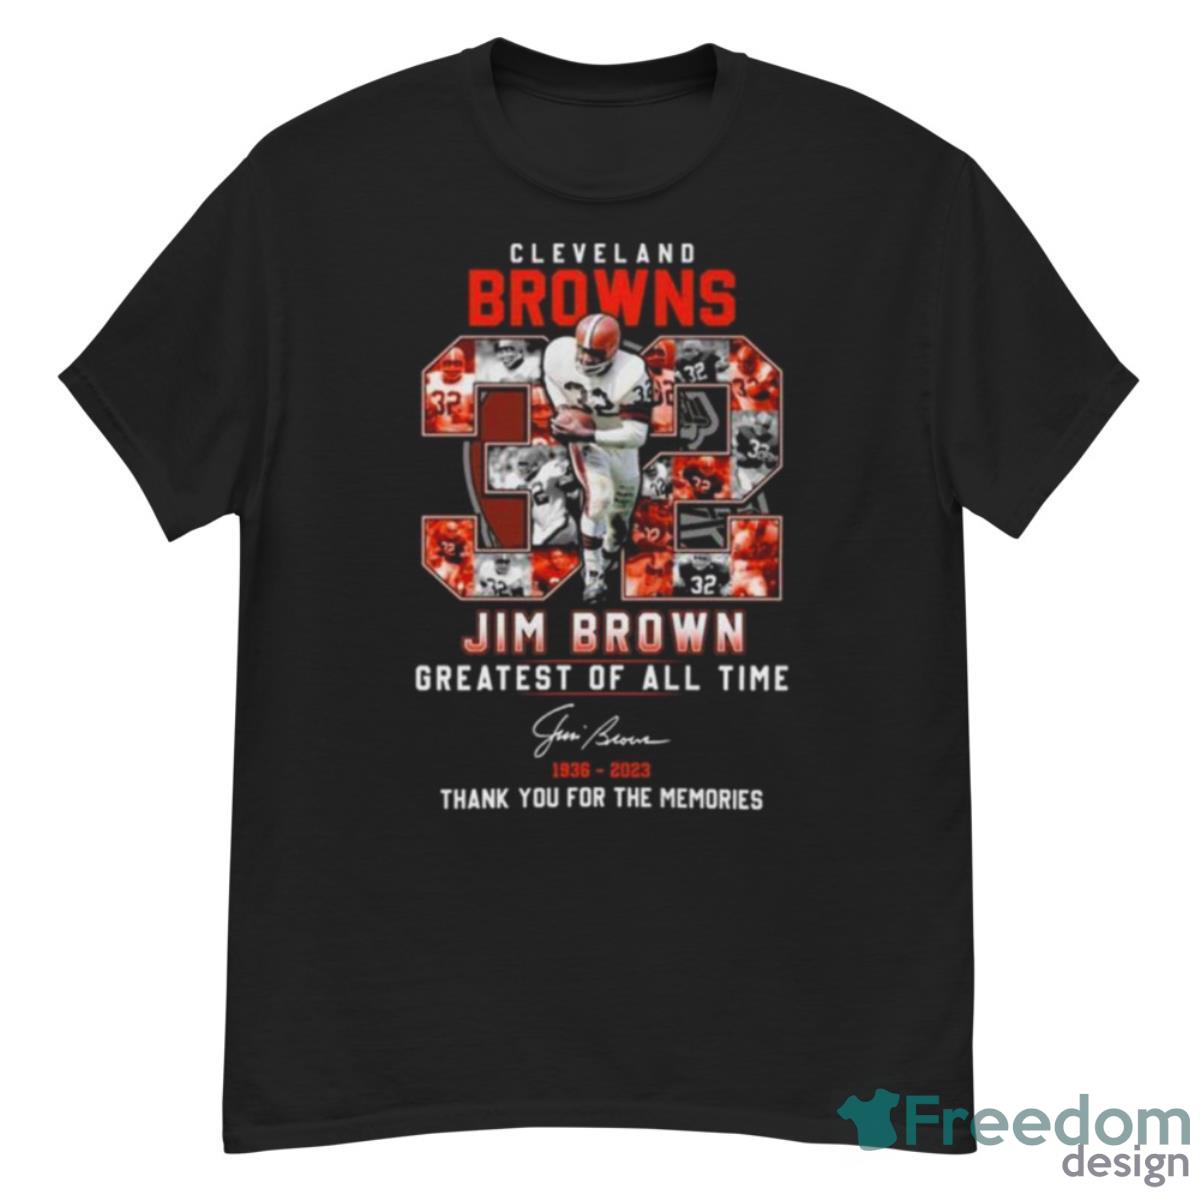 Cleveland Browns 32 Jim Brown Greatest Of All Time 1936 2023 Thank You For The Memories Signature Shirt - G500 Men’s Classic T-Shirt